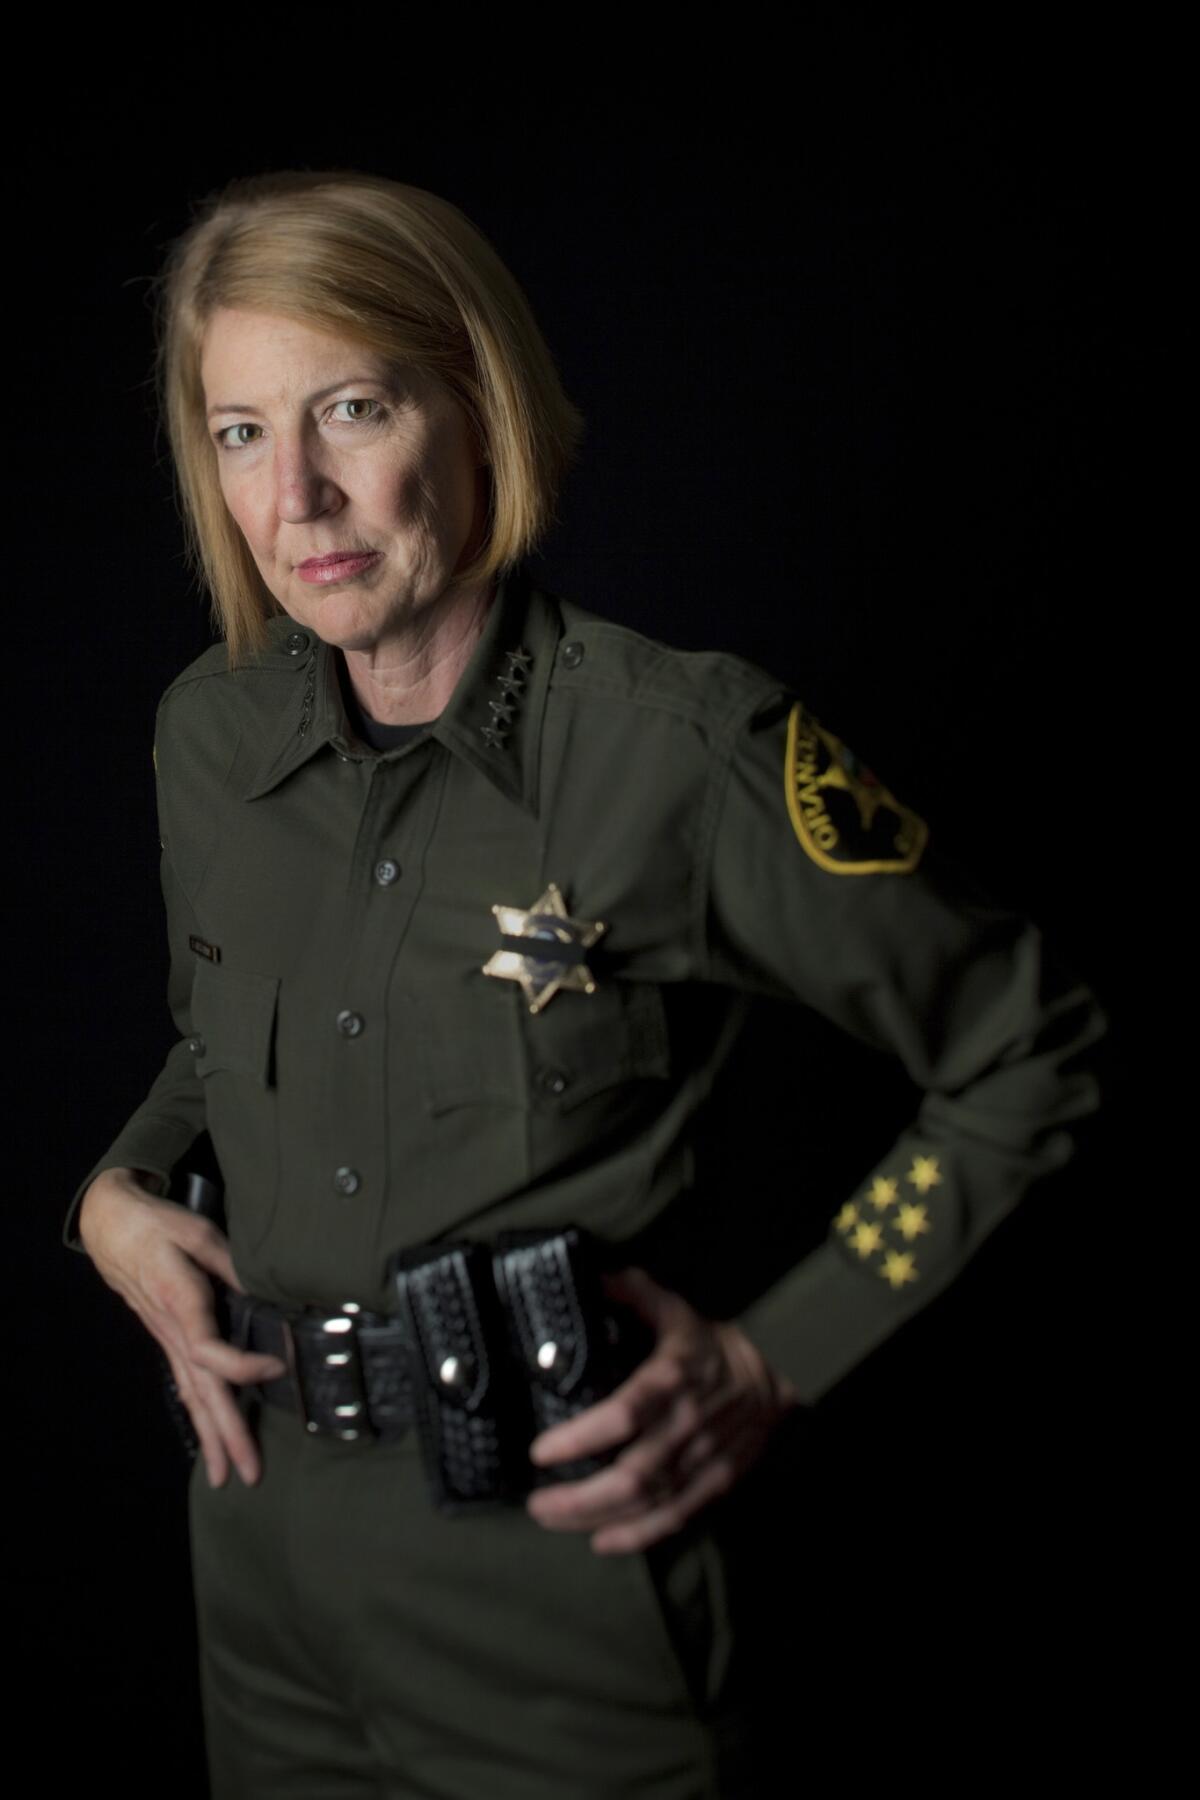 Orange County Sheriff Sandra Hutchens told supervisors that she believed the hundreds of applications for concealed weapon permits submitted in the county were just an ¿initial rush¿ and predicted the trend would taper off.